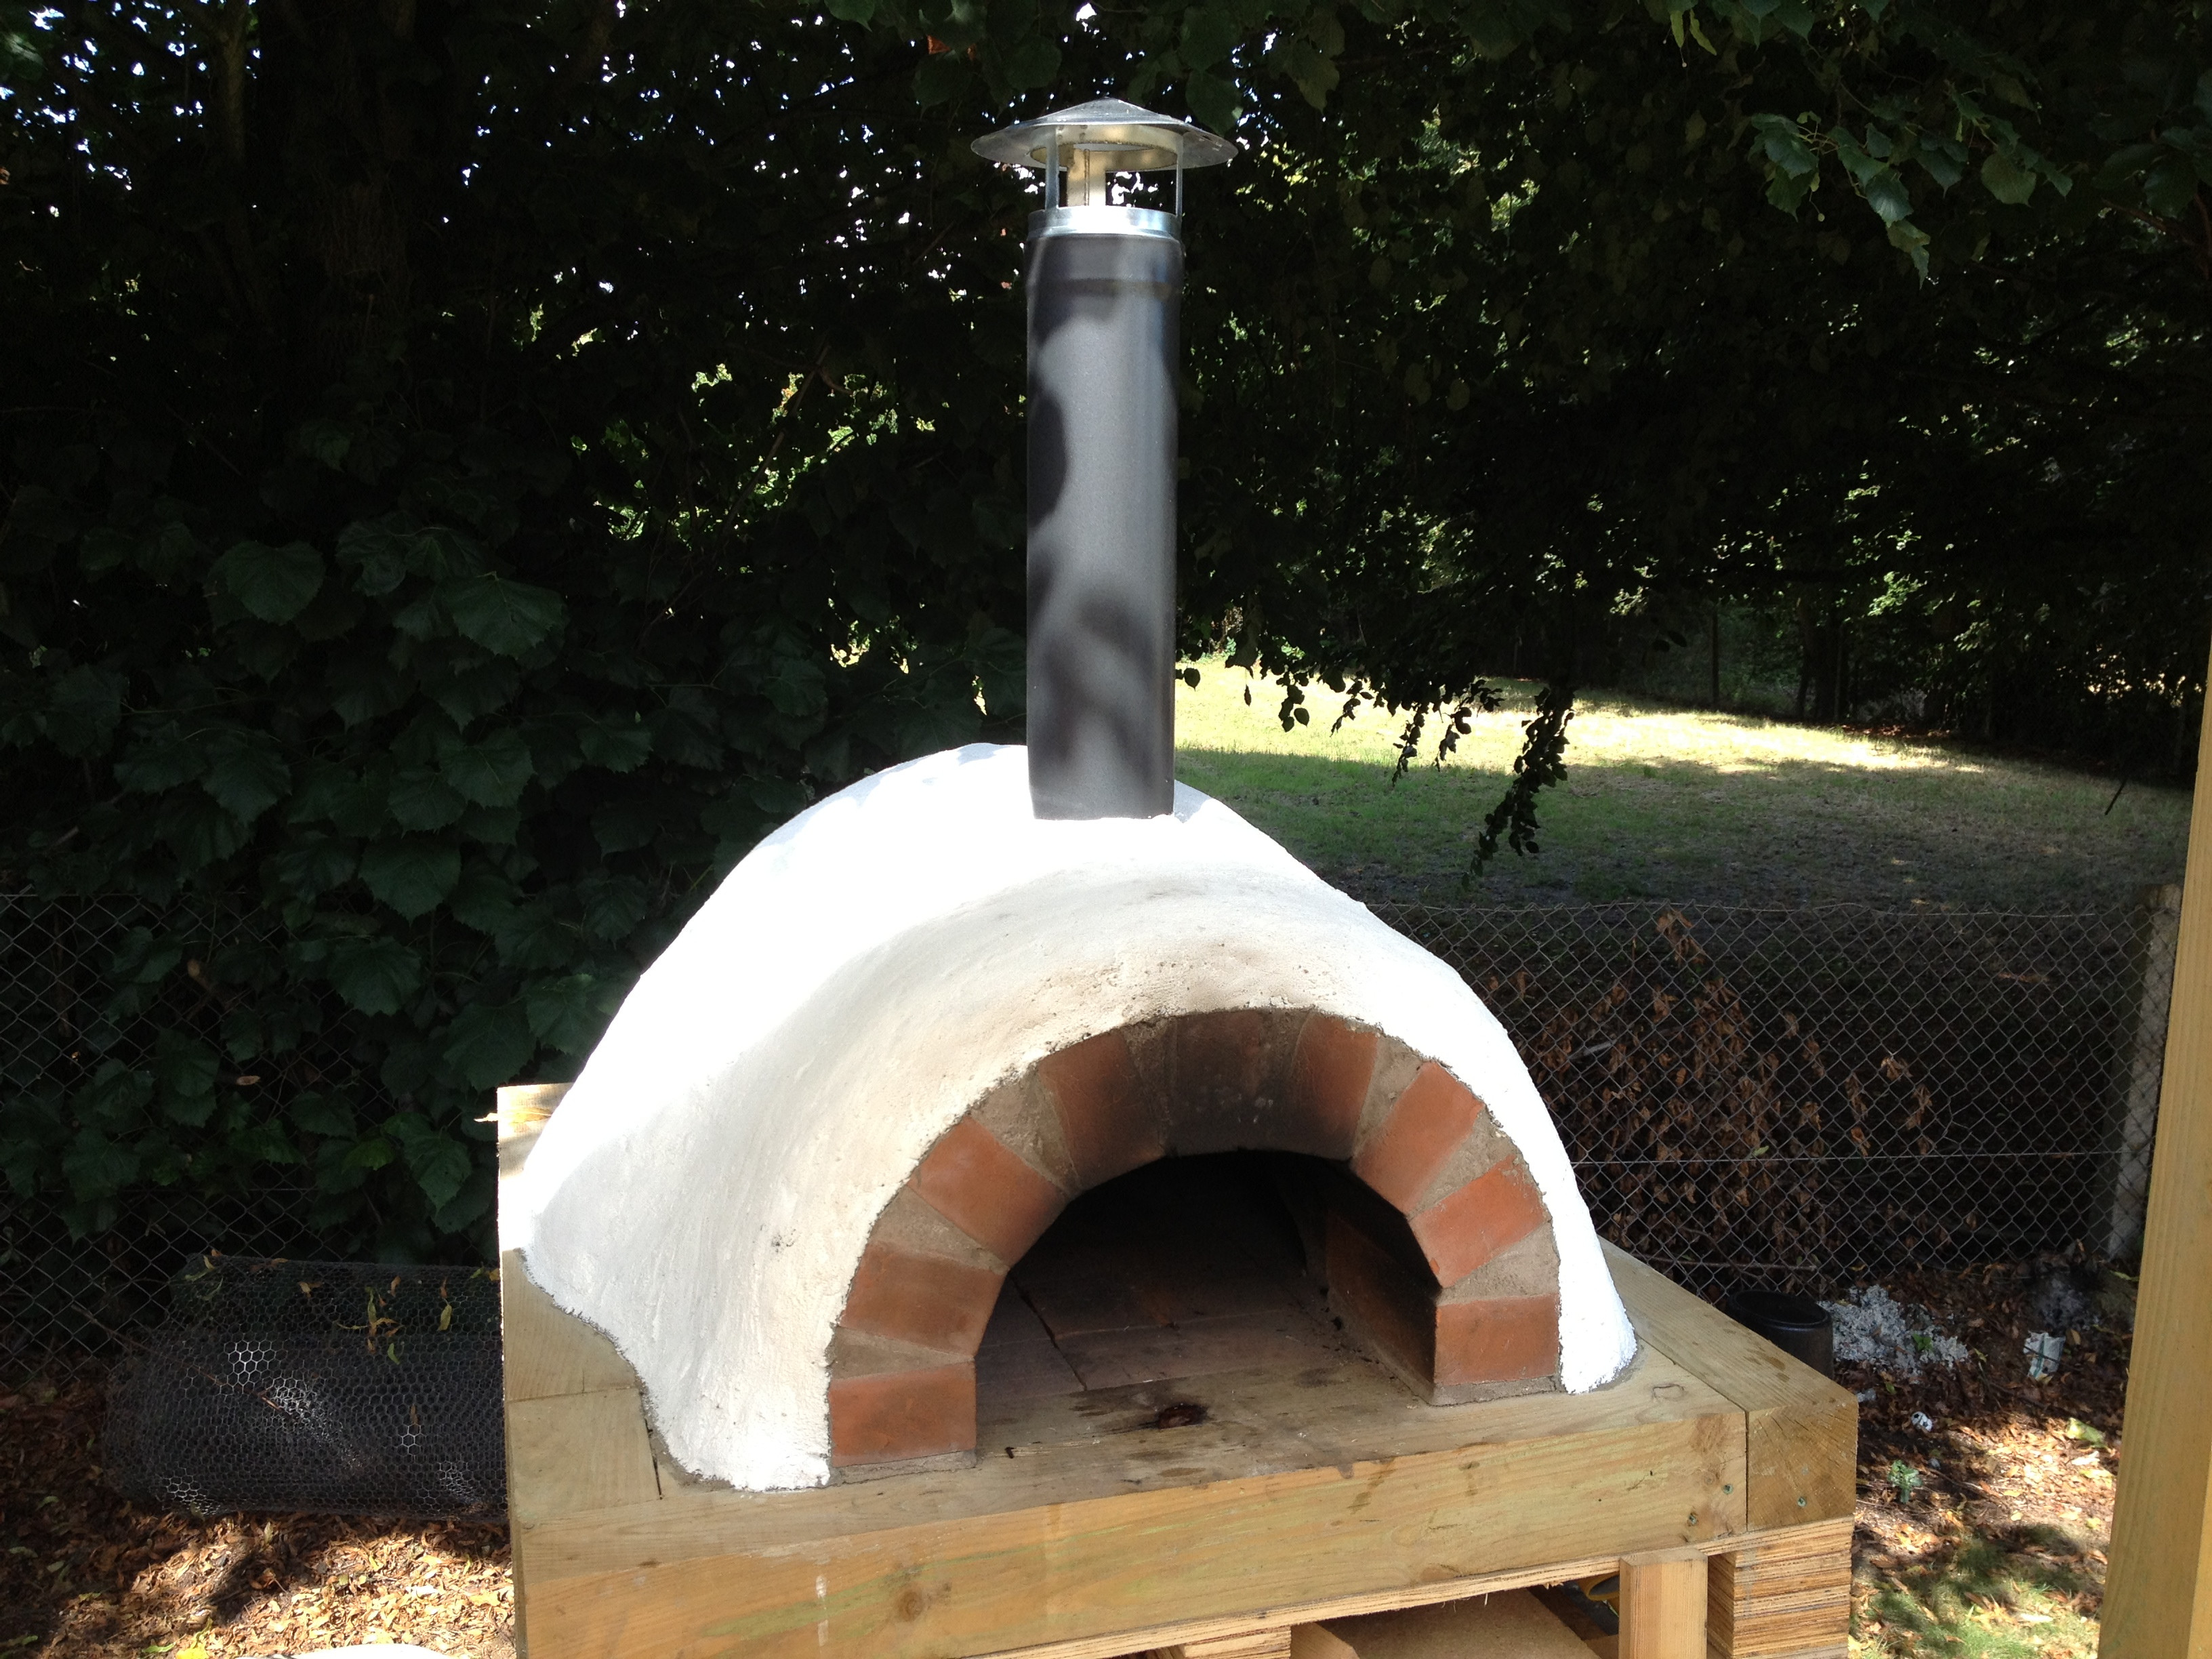 DIY Wood Fired Pizza Oven
 The Homemade Pallet Based Wood Fired Pizza Oven